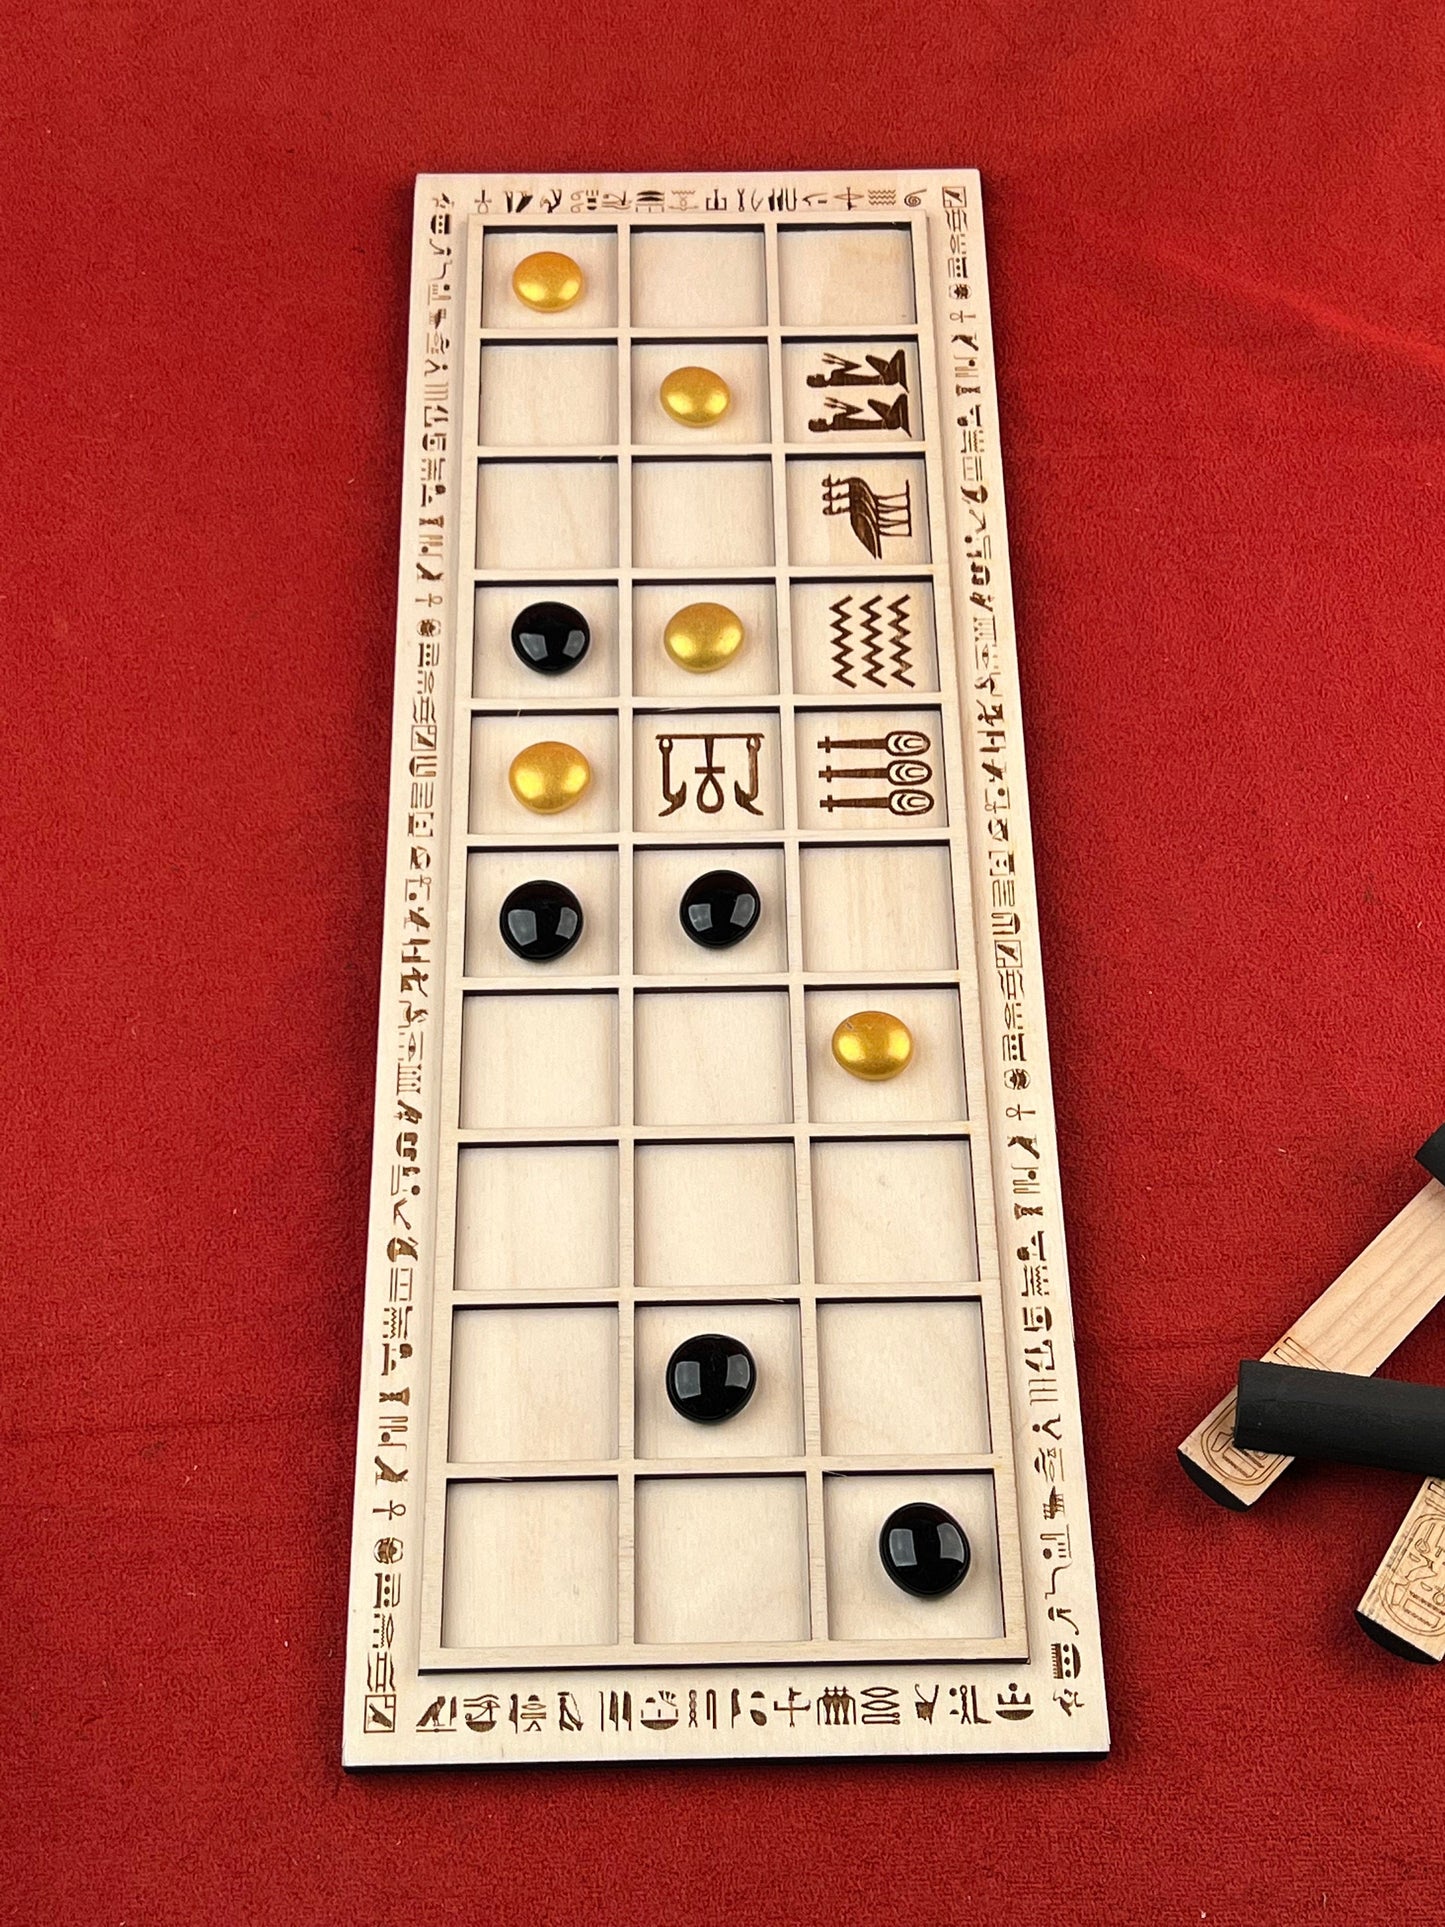 SENET! Flat Table Edition. The Ancient Egyptian Game of the Pharaohs.